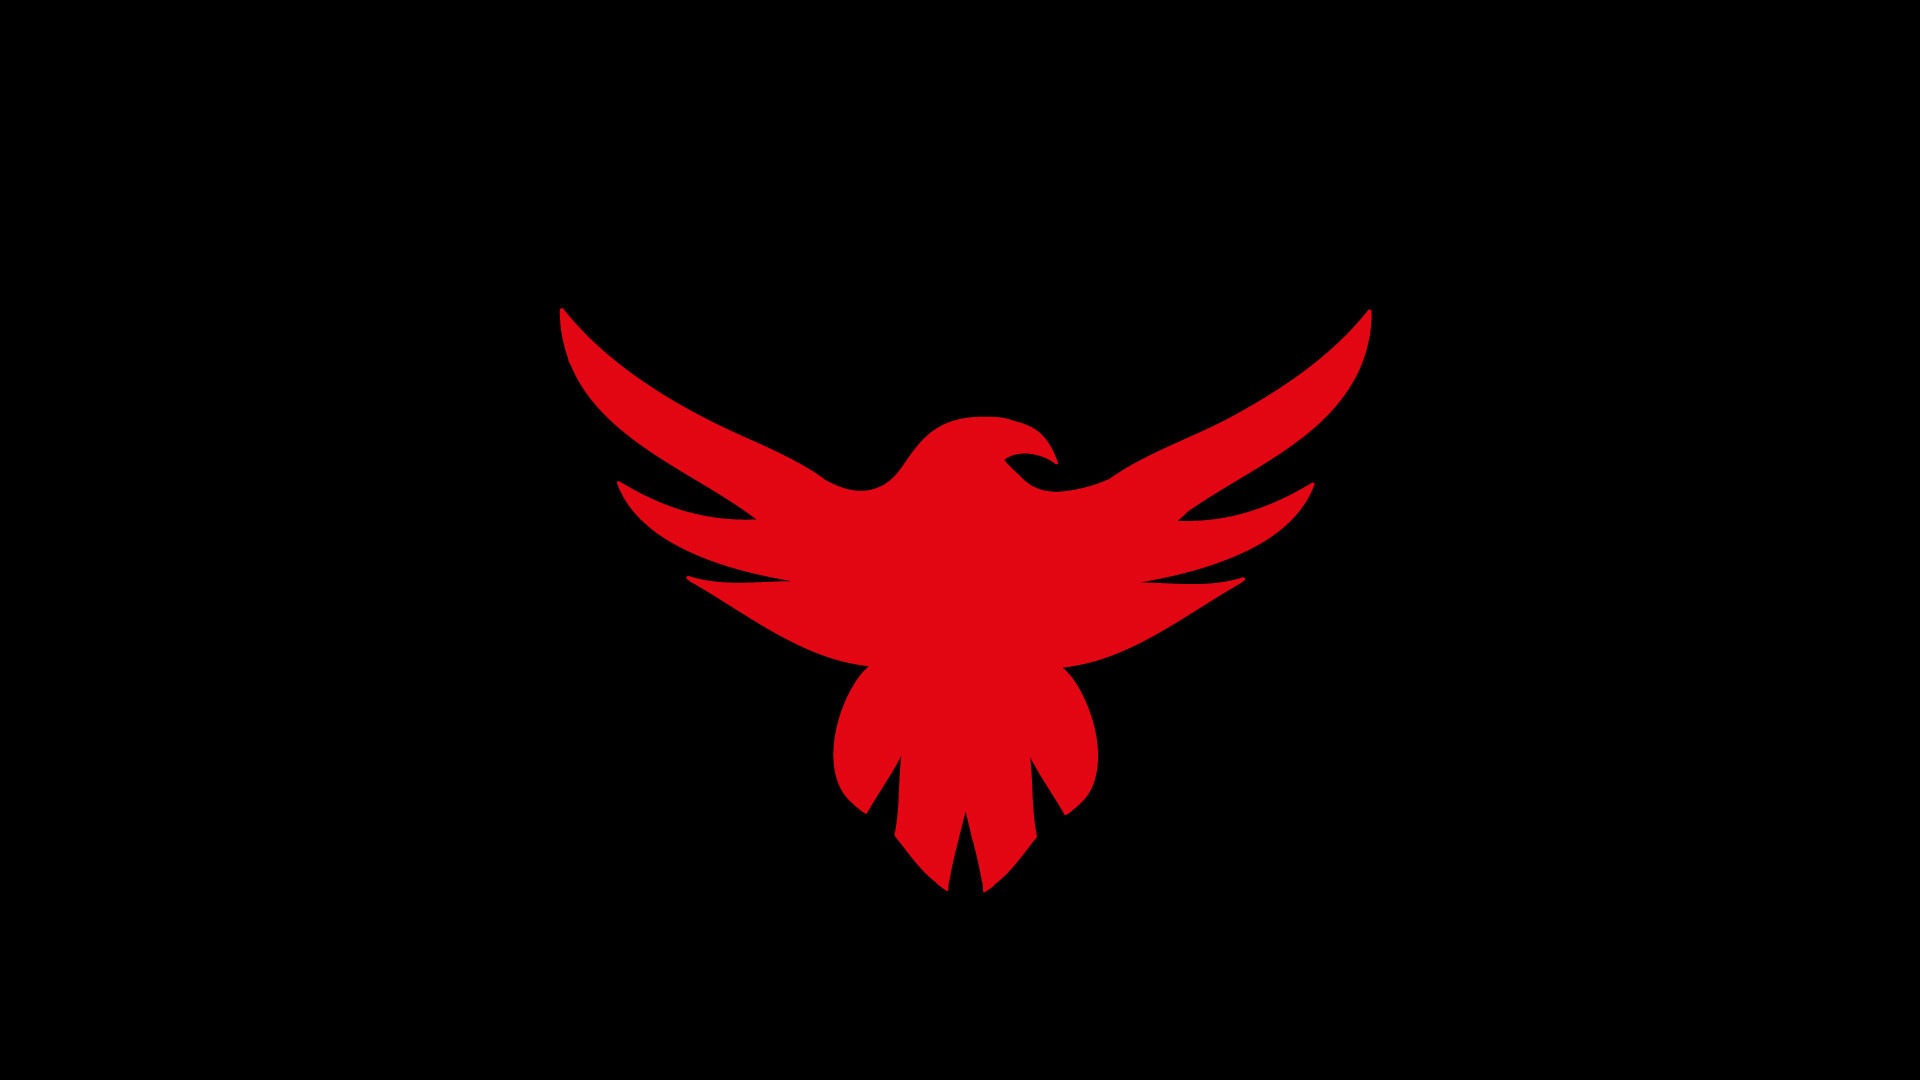 1920x1080 red eagle wallpaper